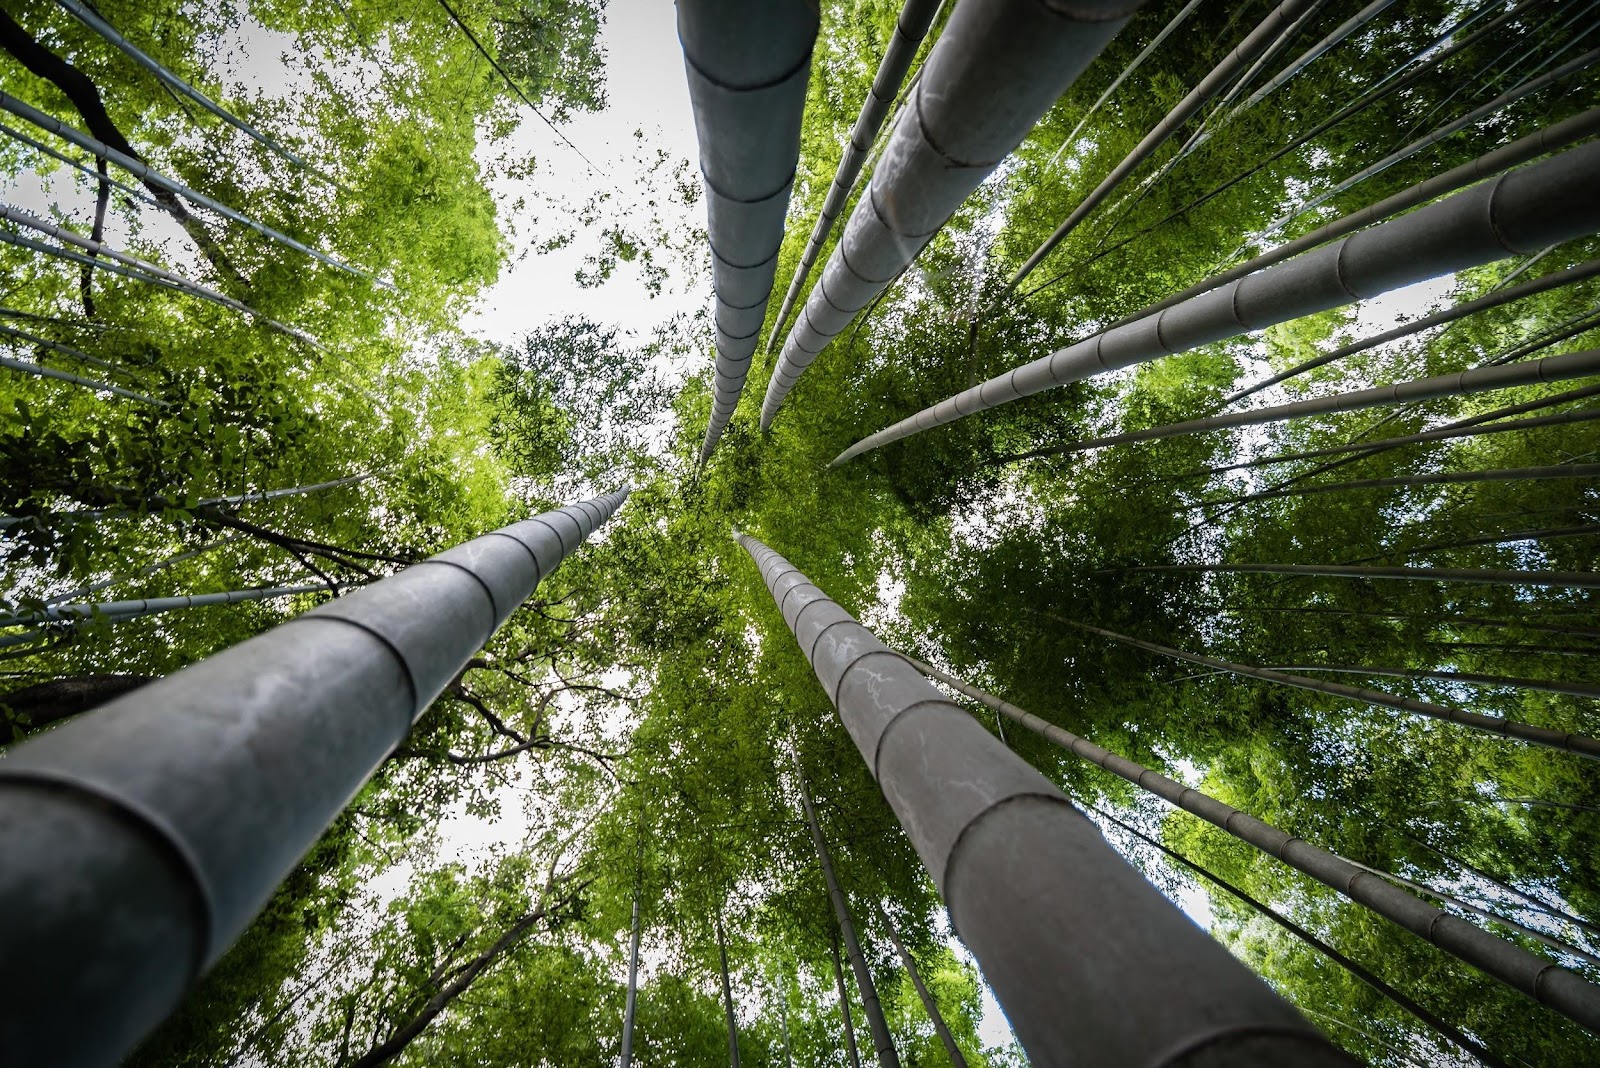 How long does bamboo live?